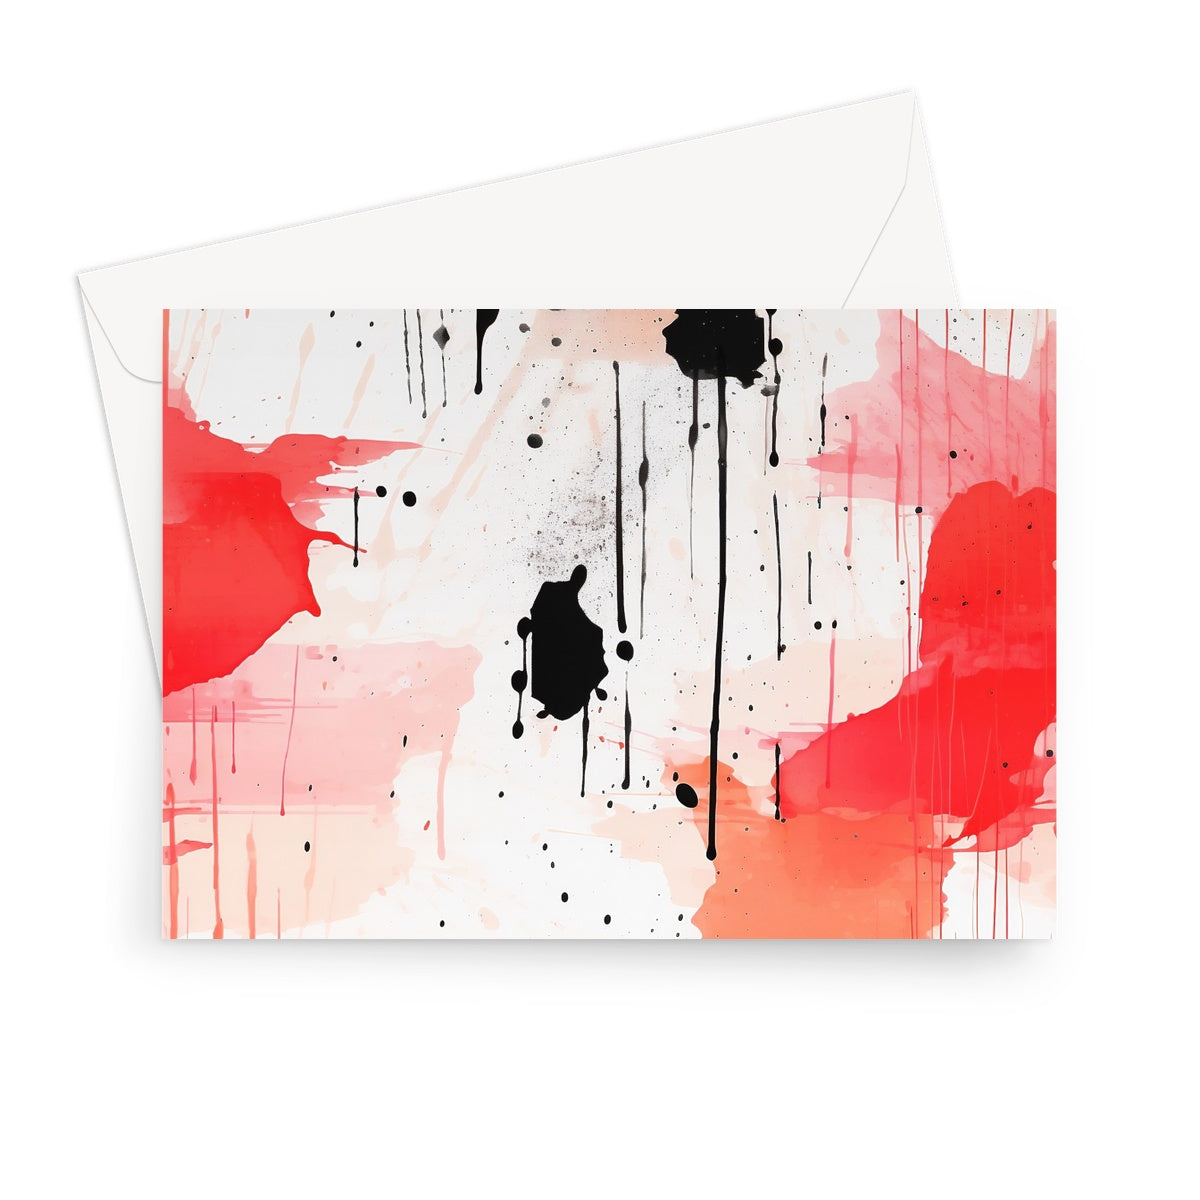 Expressive Red Splasher: Greeting Card with a Red Burst!